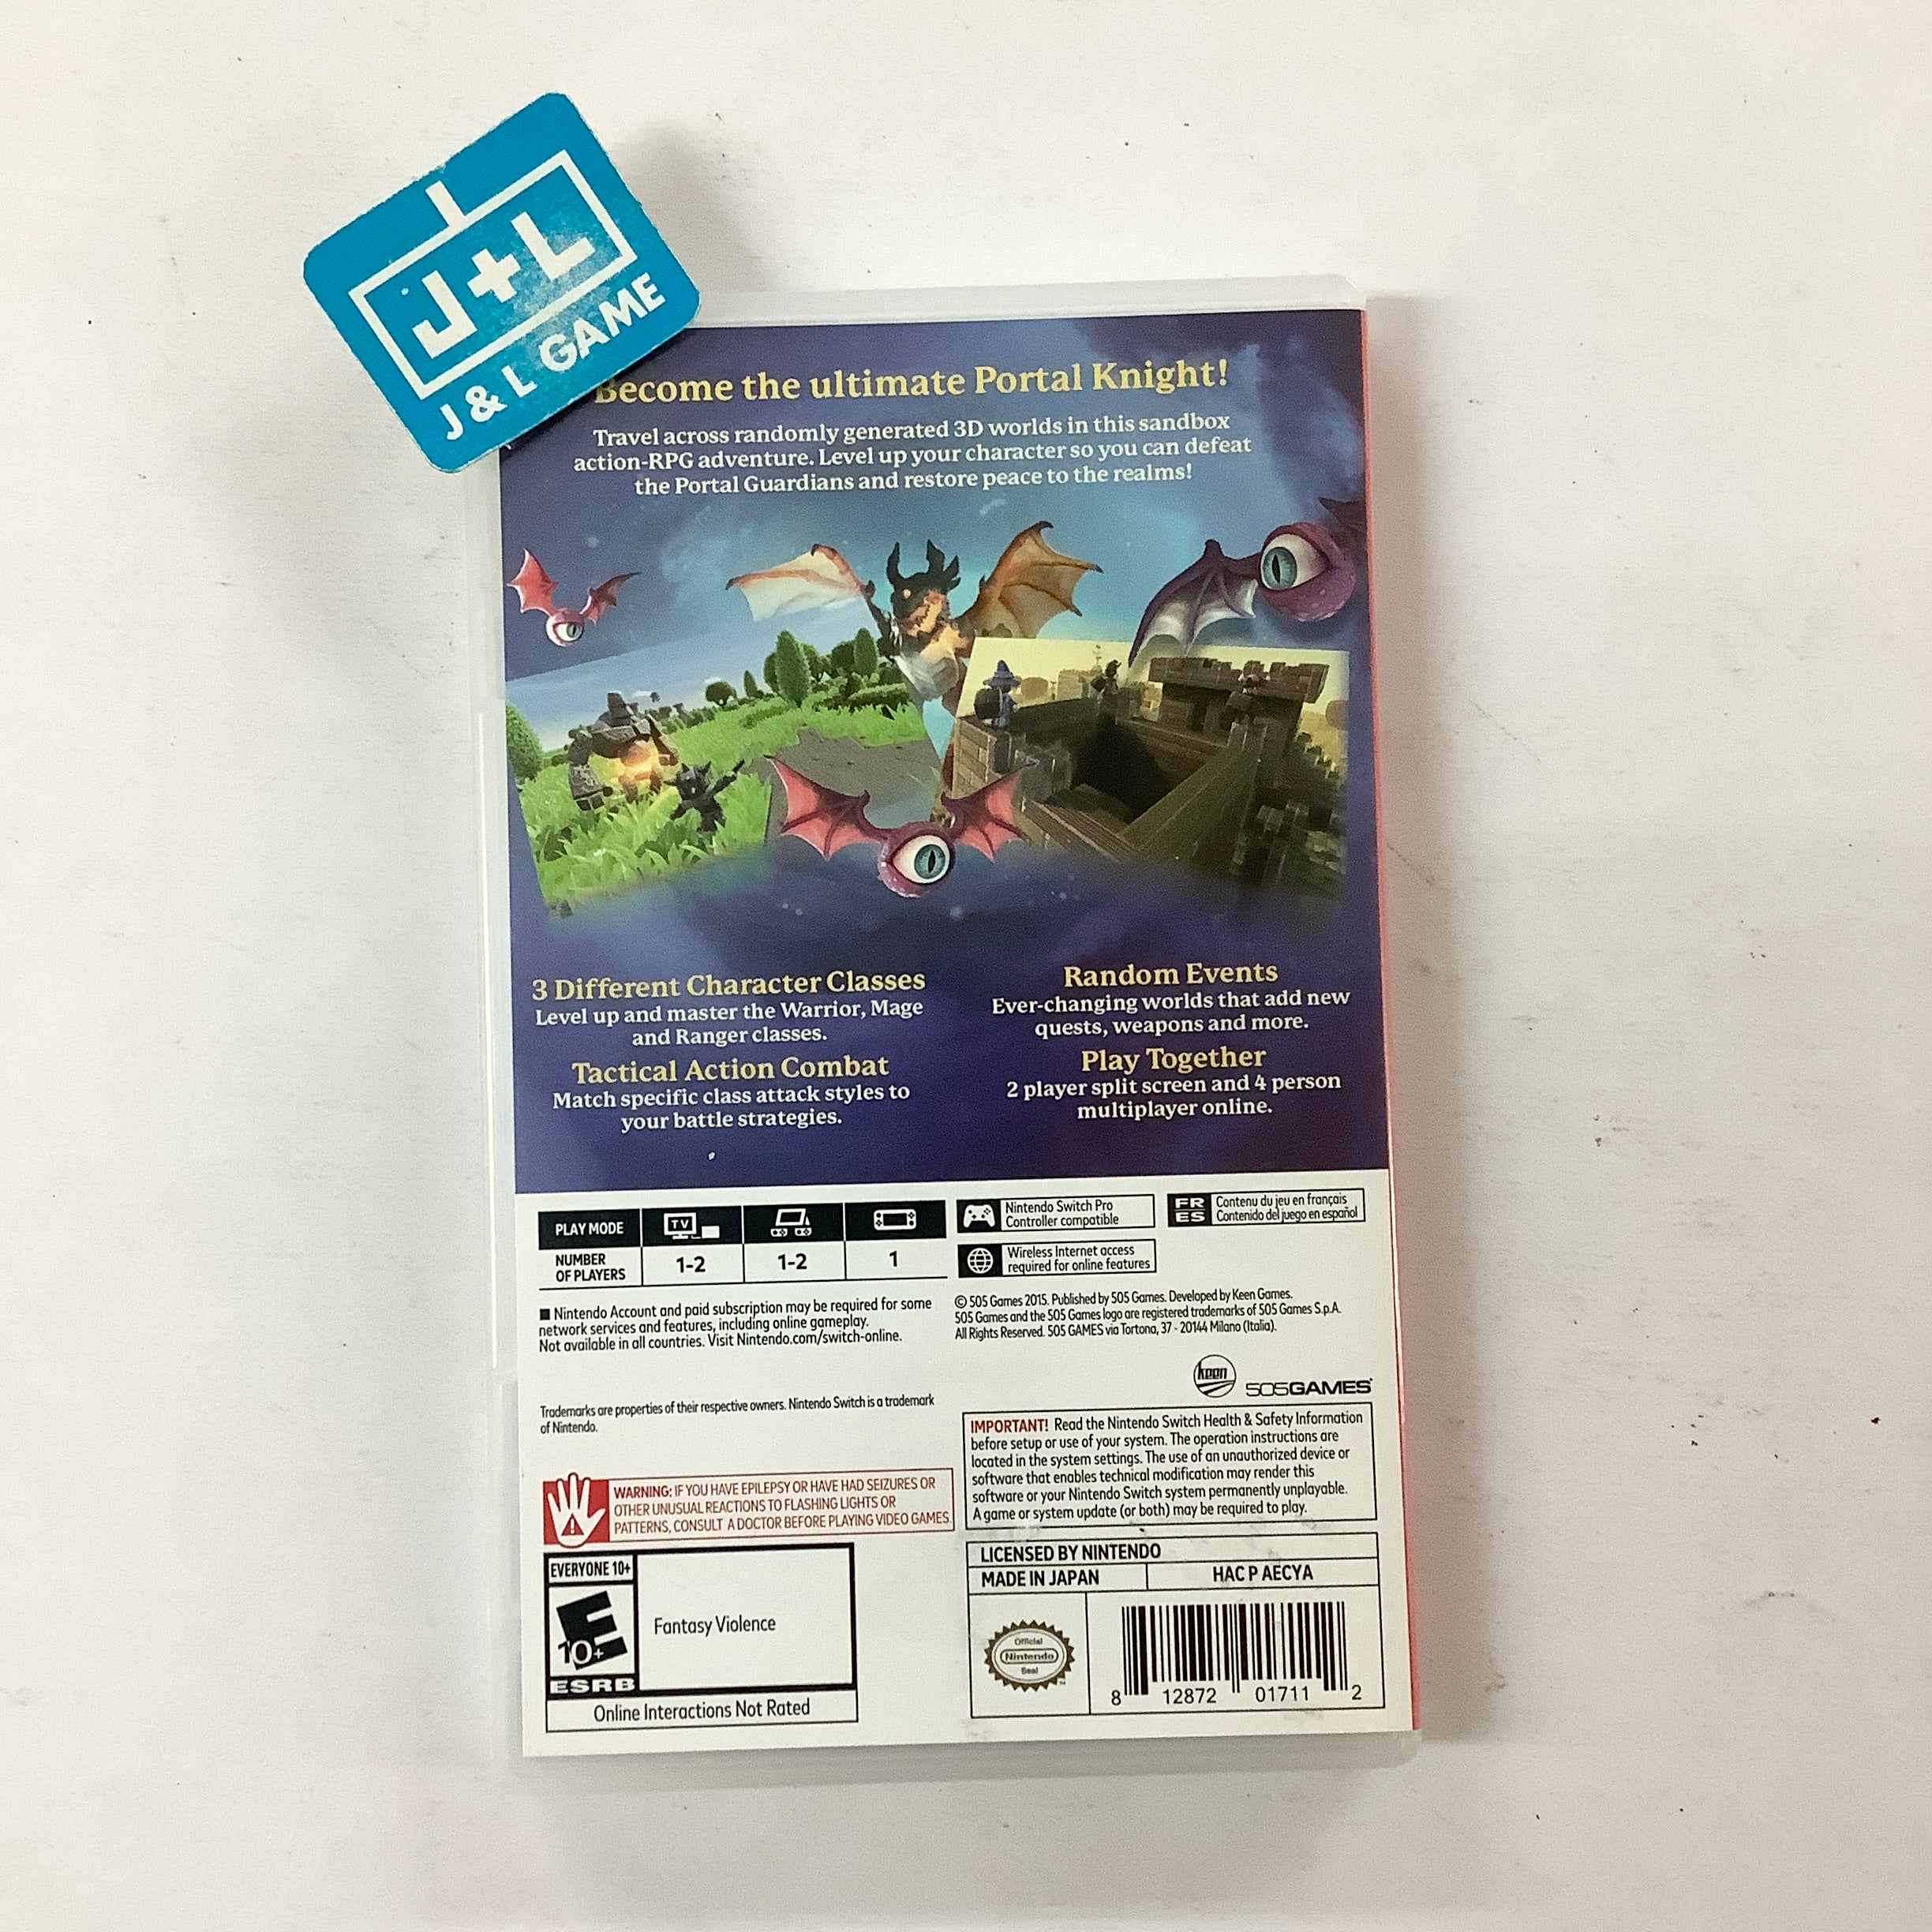 Portal Knights - (NSW) Nintendo Switch [Pre-Owned] Video Games 505 Games   